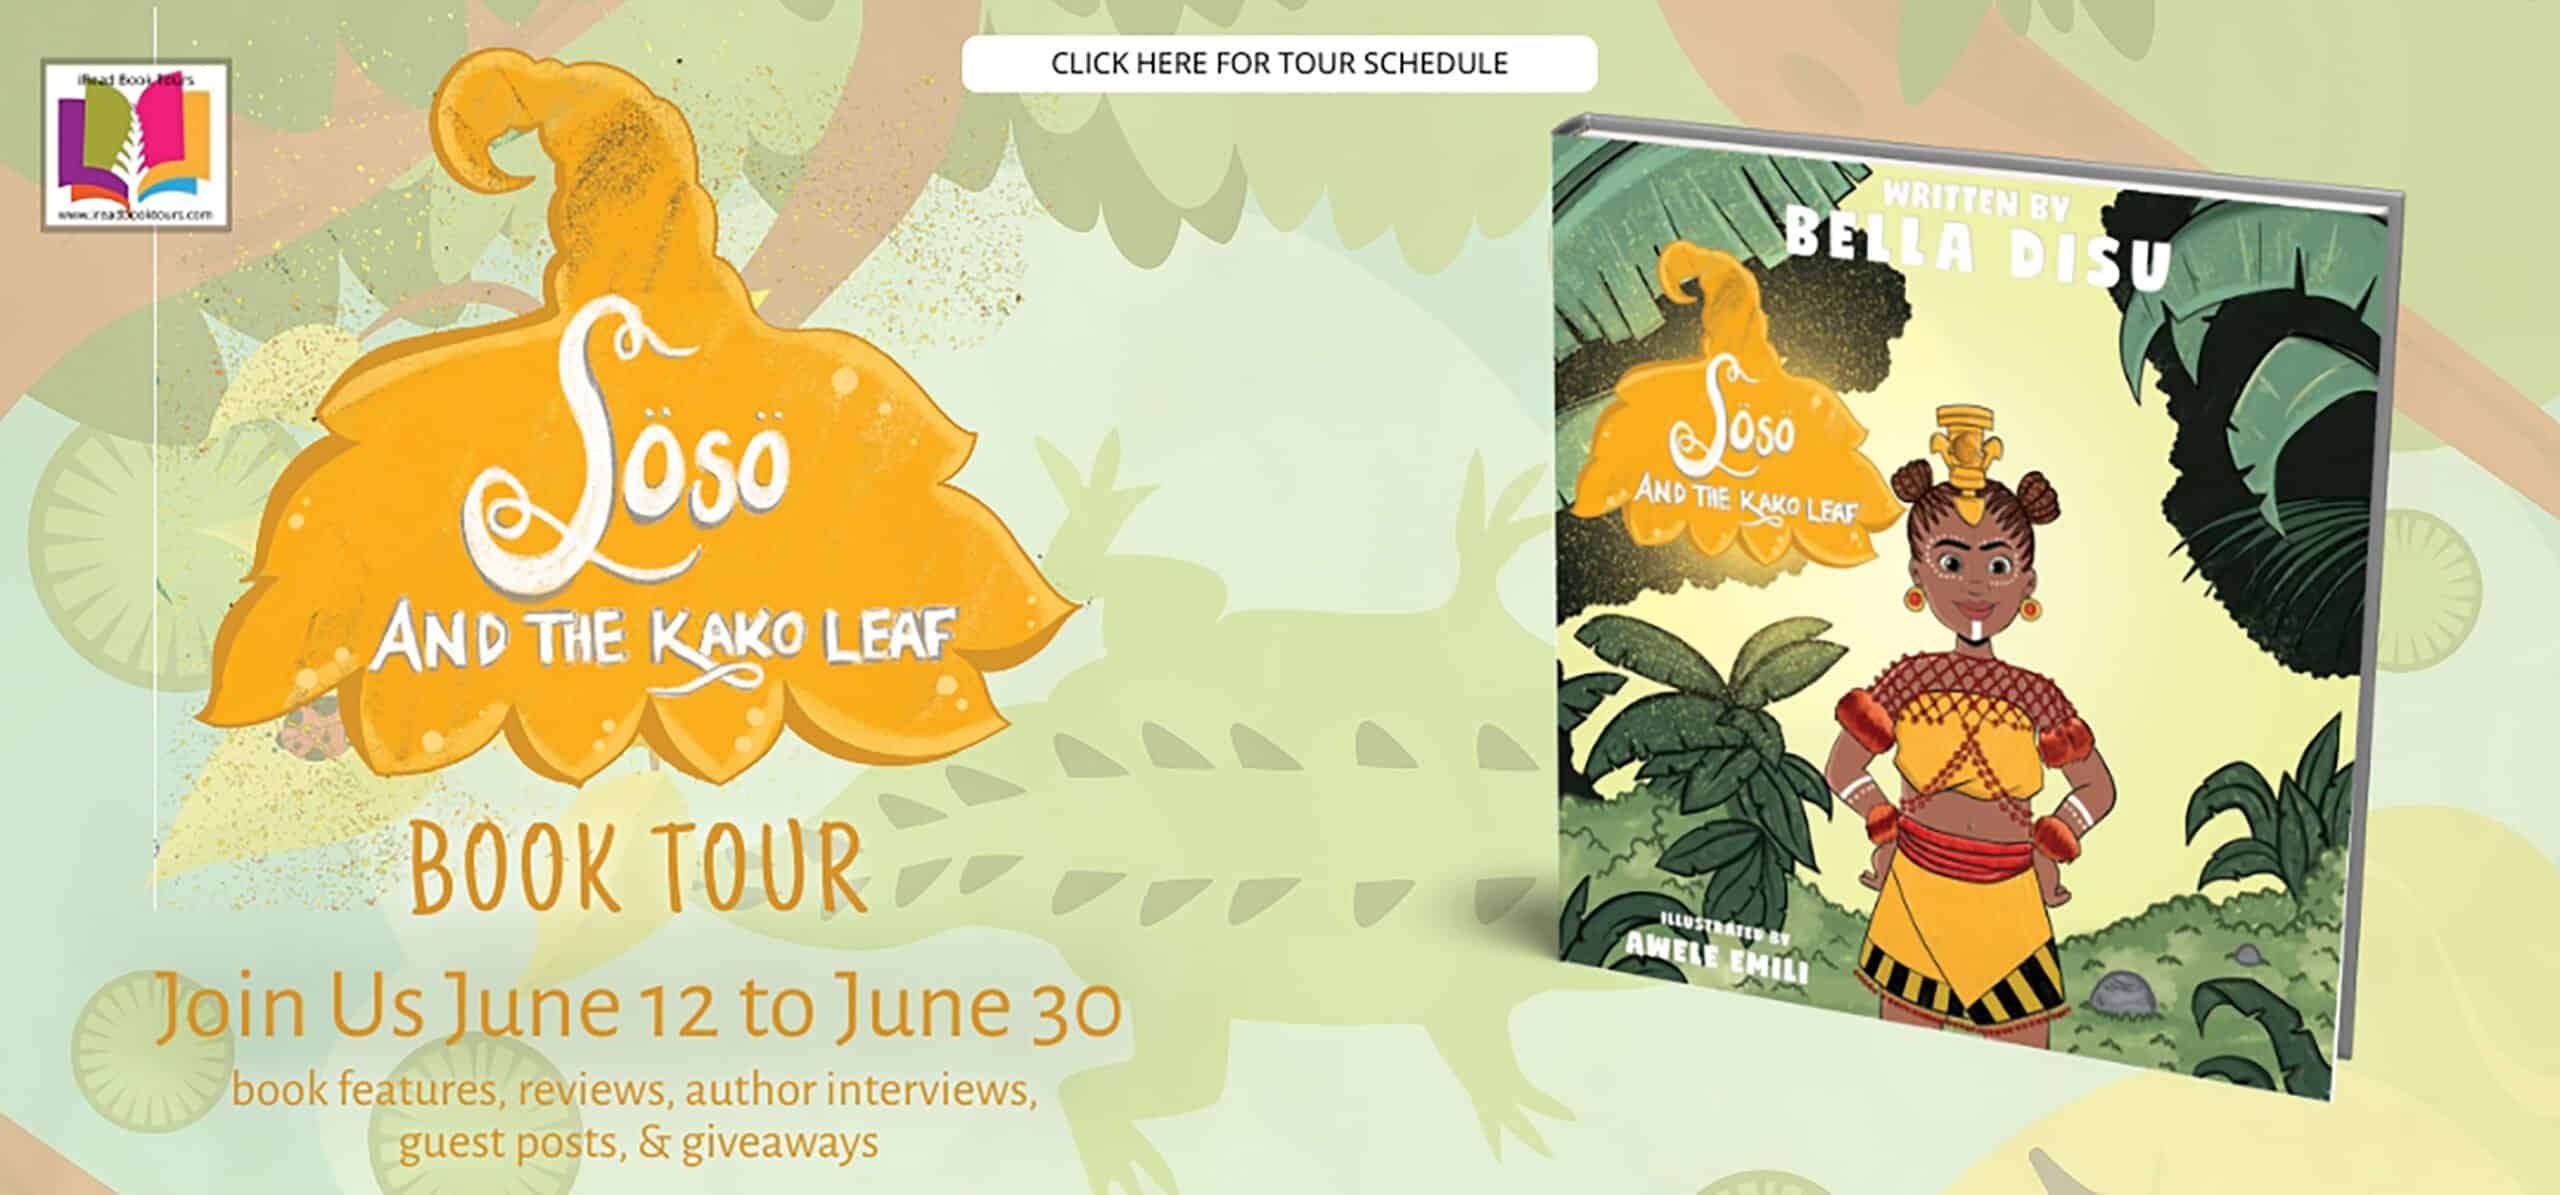 Soso and The Kako Leaf by Bella Disu | Children's Book Review | #Confidence #SelfEsteem | @iReadBookTours